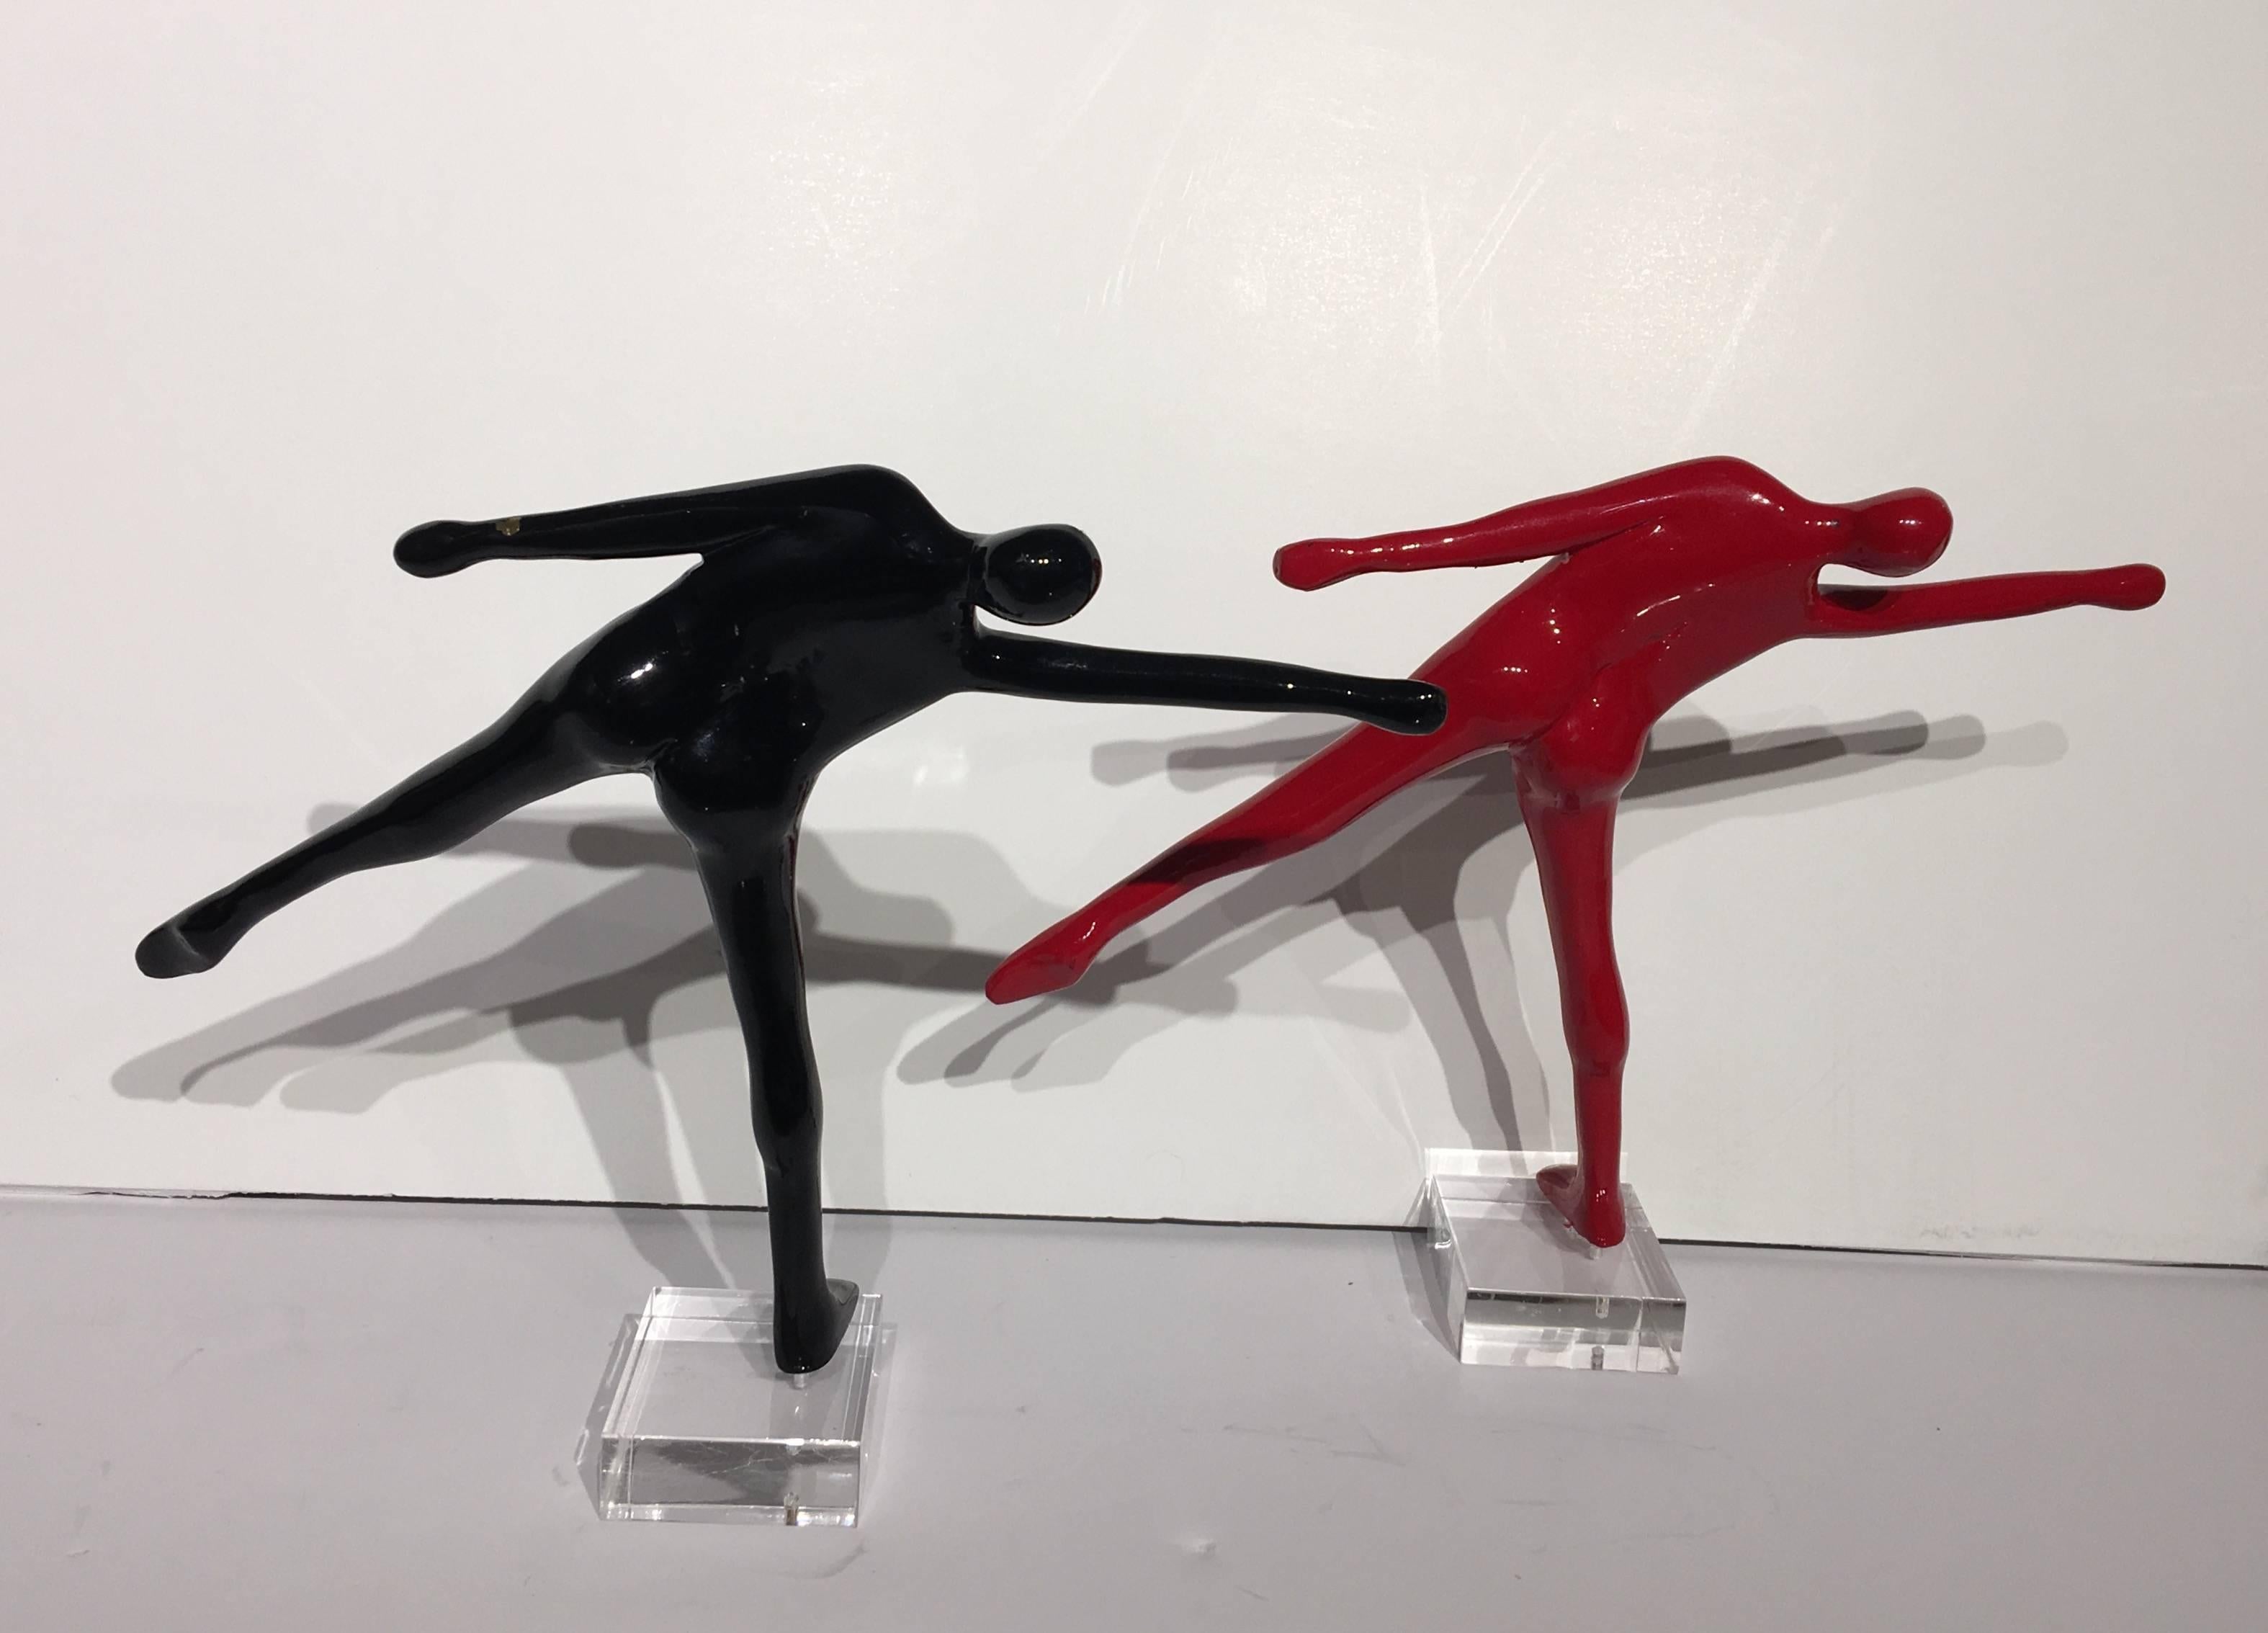 Pair of Bronze sculptures
11 x 7.8 x 2.3 in
28 x 20 x 6 cm

Available in RED & BLACK painted patinas

Born in Thessaloniki, Greece, Kostis Georgiou studied stage scenery in Florence (1981-1982), painting and sculpture in the School of Fine